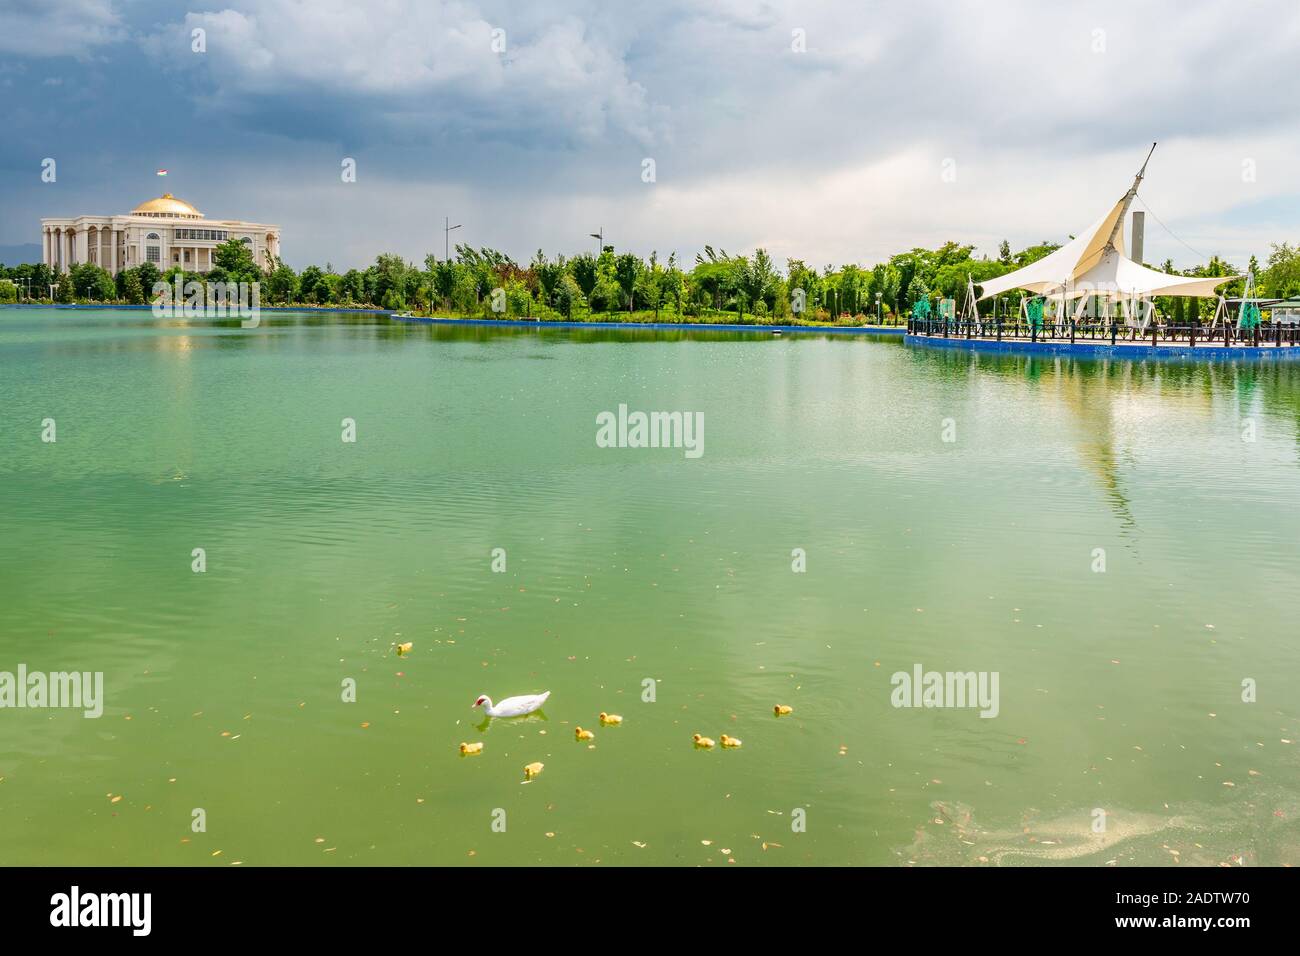 Dushanbe Flag Pole Park Lake View of Swimming Swan with Ducklings and Palace of Nations on a Cloudy Rainy Day Stock Photo